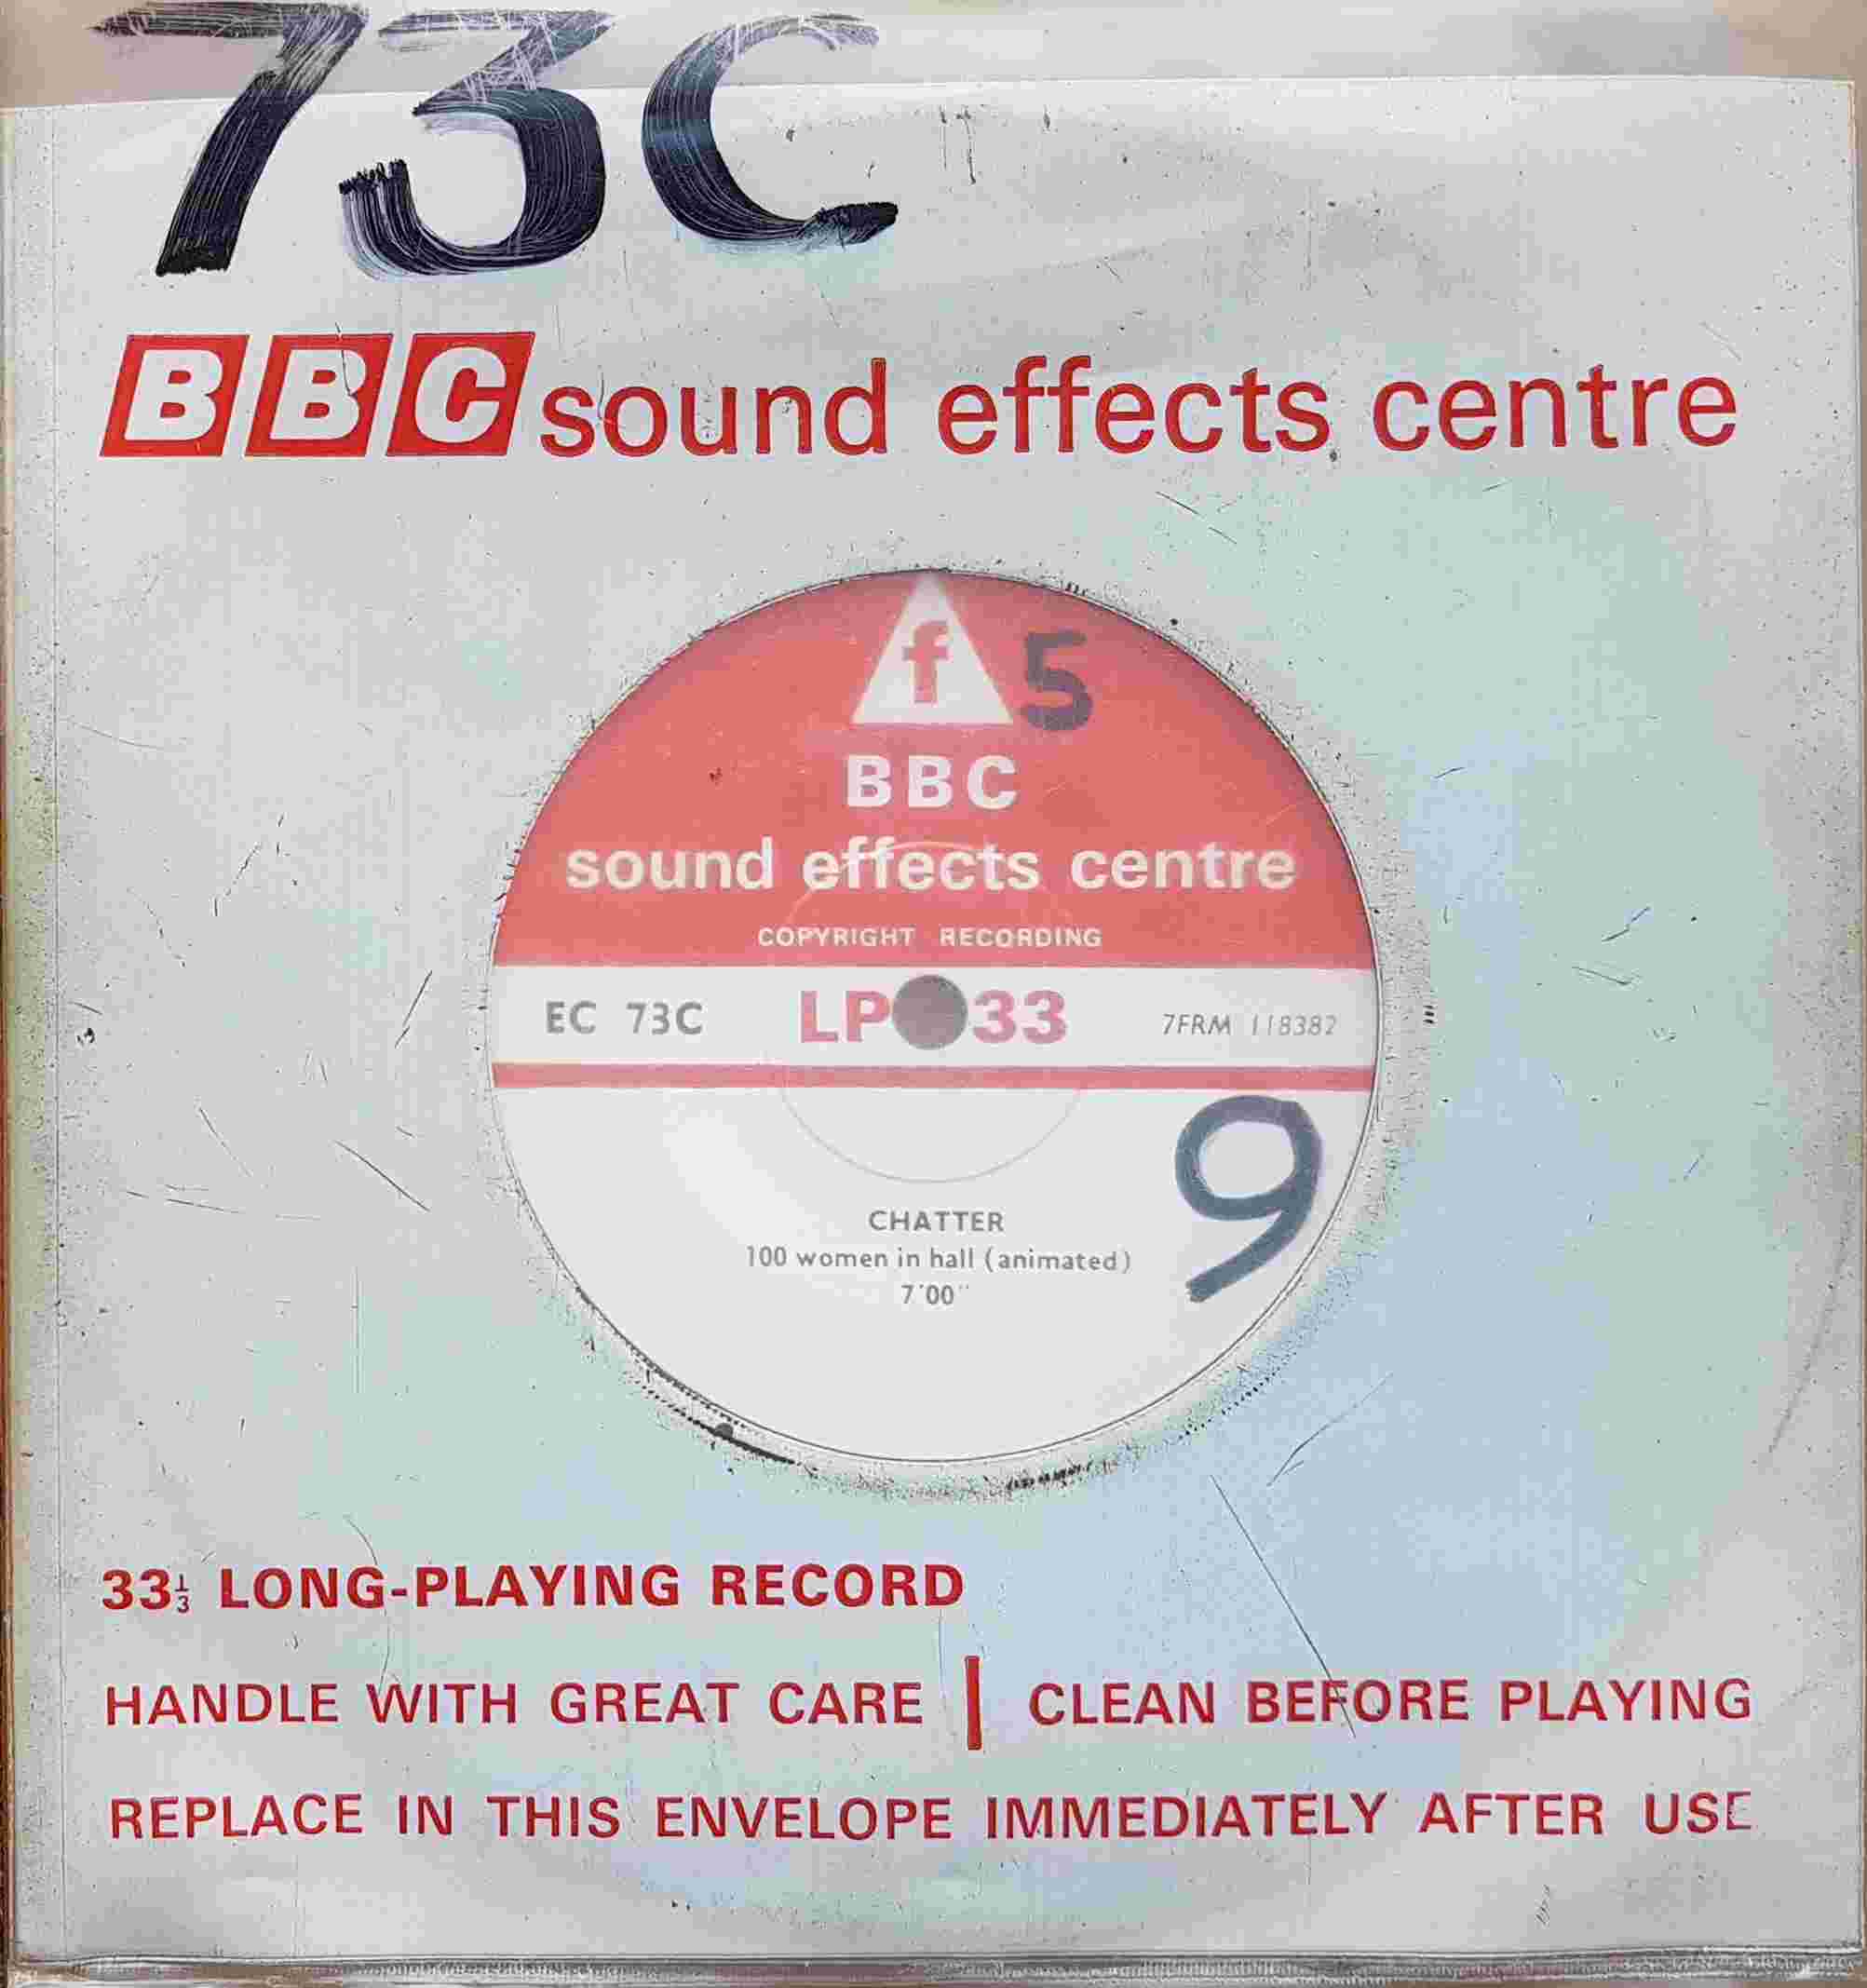 Picture of EC 73C Chatter by artist Not registered from the BBC singles - Records and Tapes library